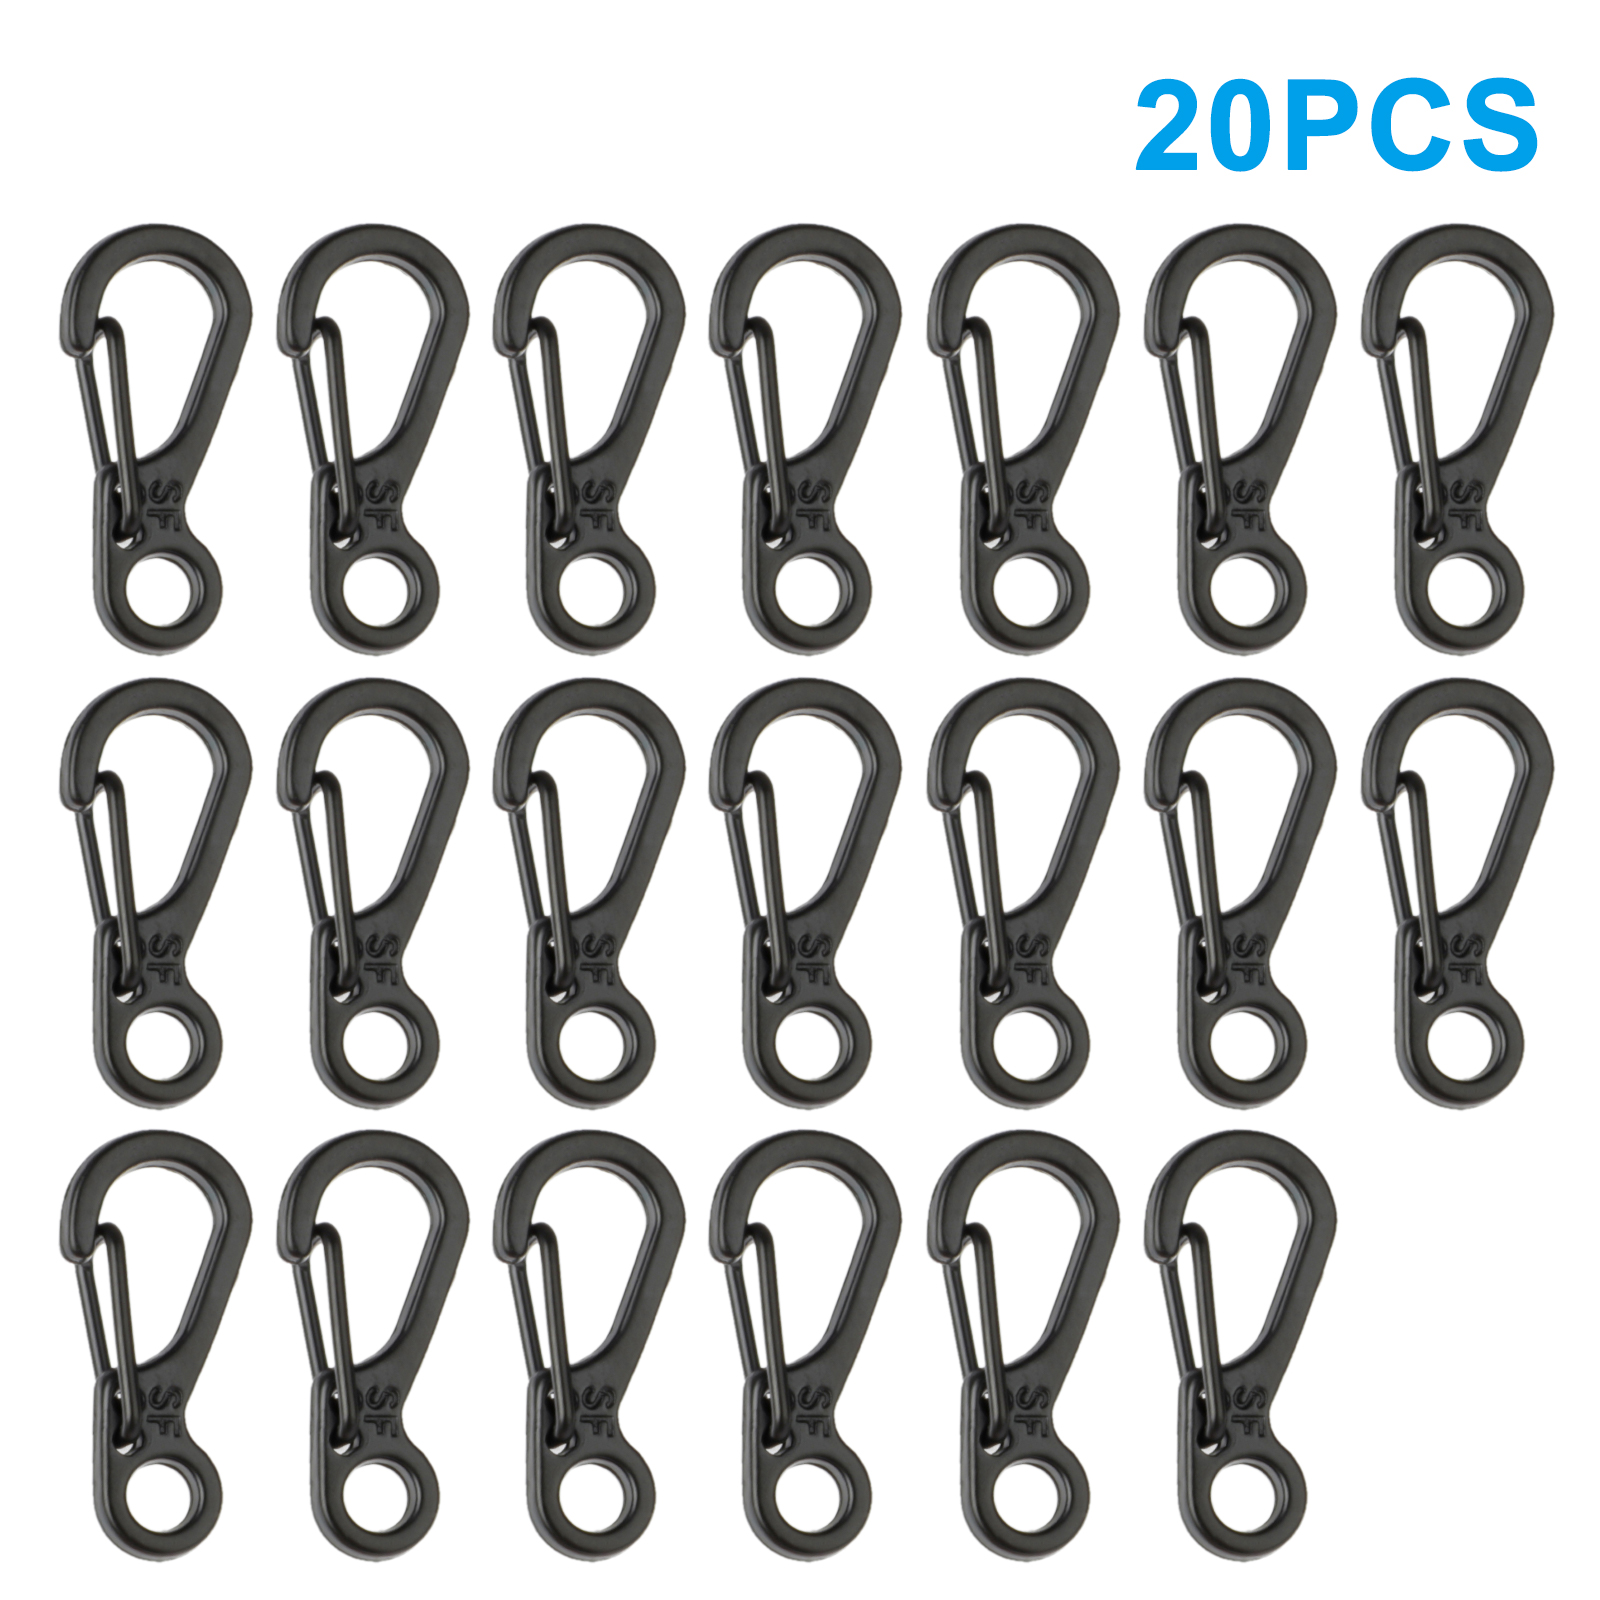 Details about   Mini Heavy Duty Aluminum Carabiner Key Chain Snap Hooks Clip Outdoor Camping*10 